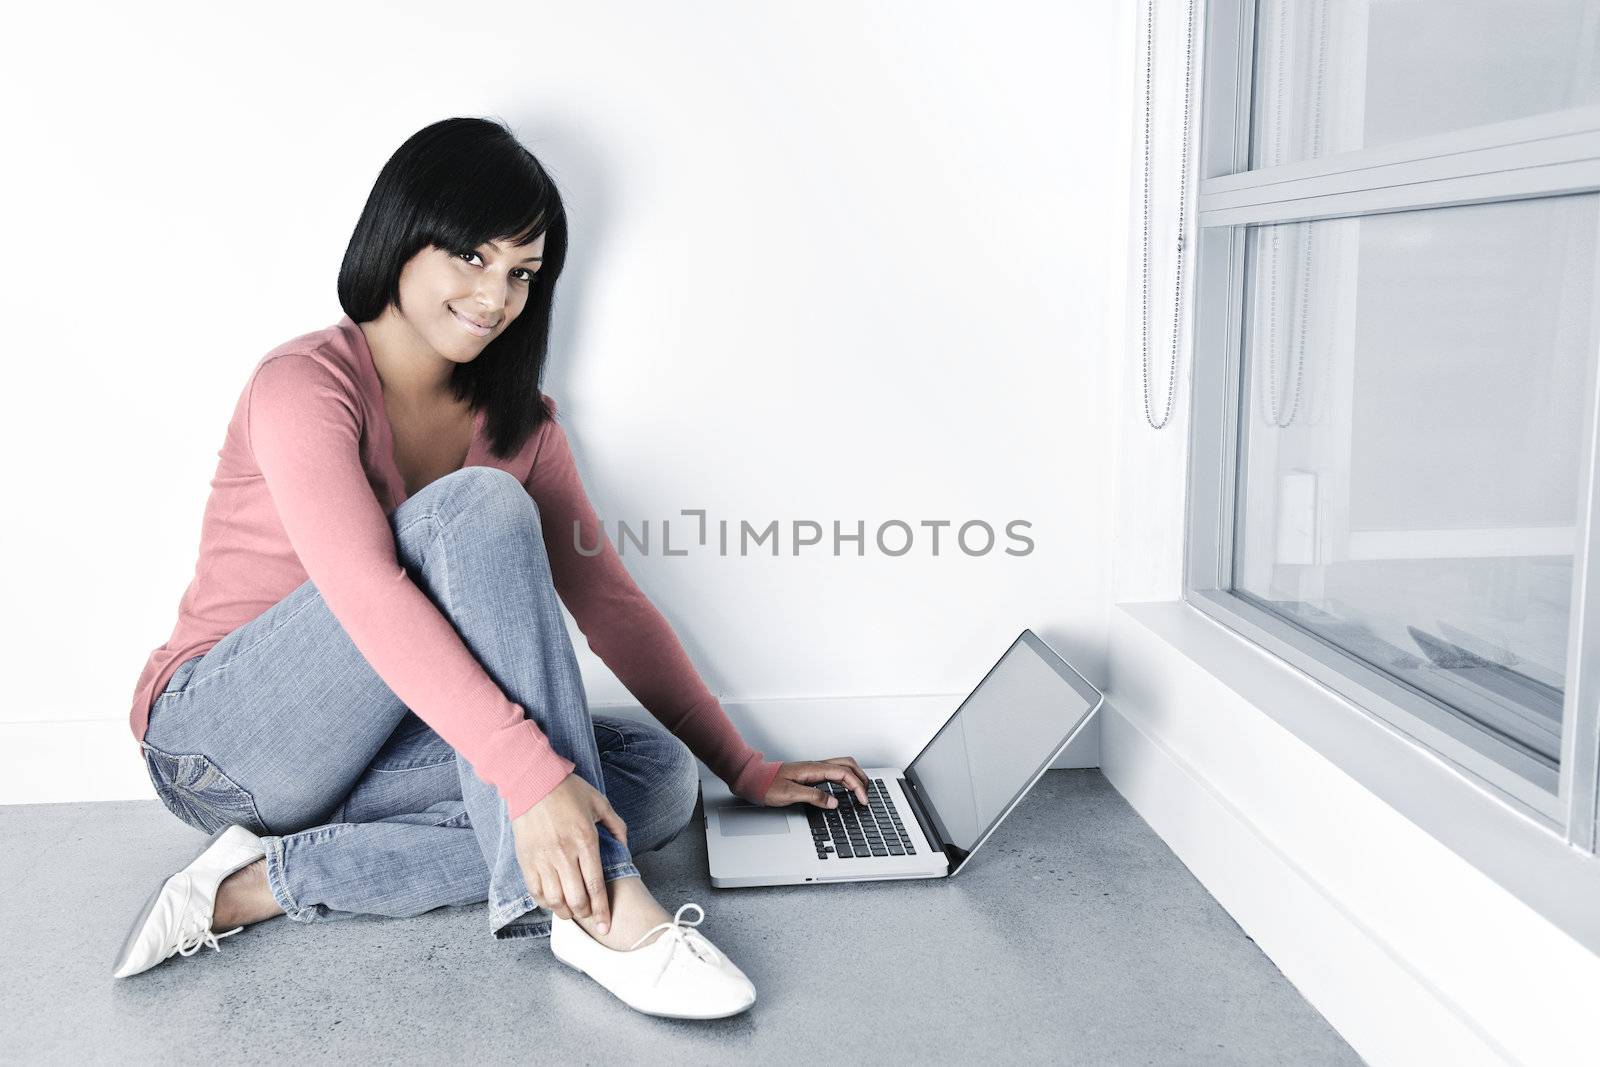 Young black woman with laptop computer sitting on floor smiling